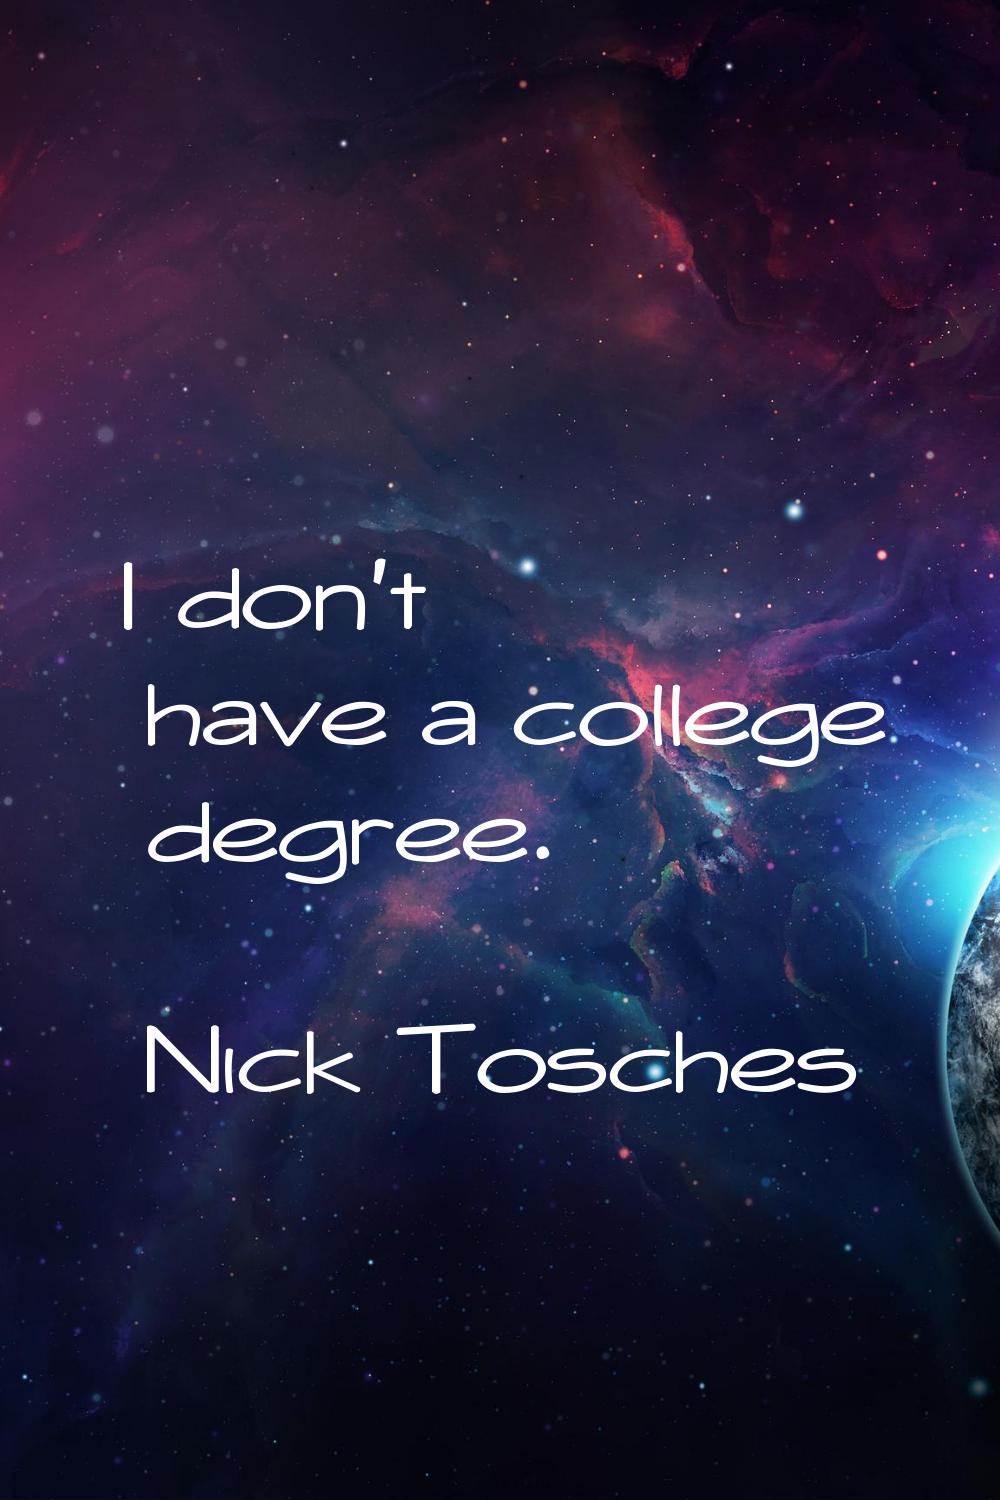 I don't have a college degree.